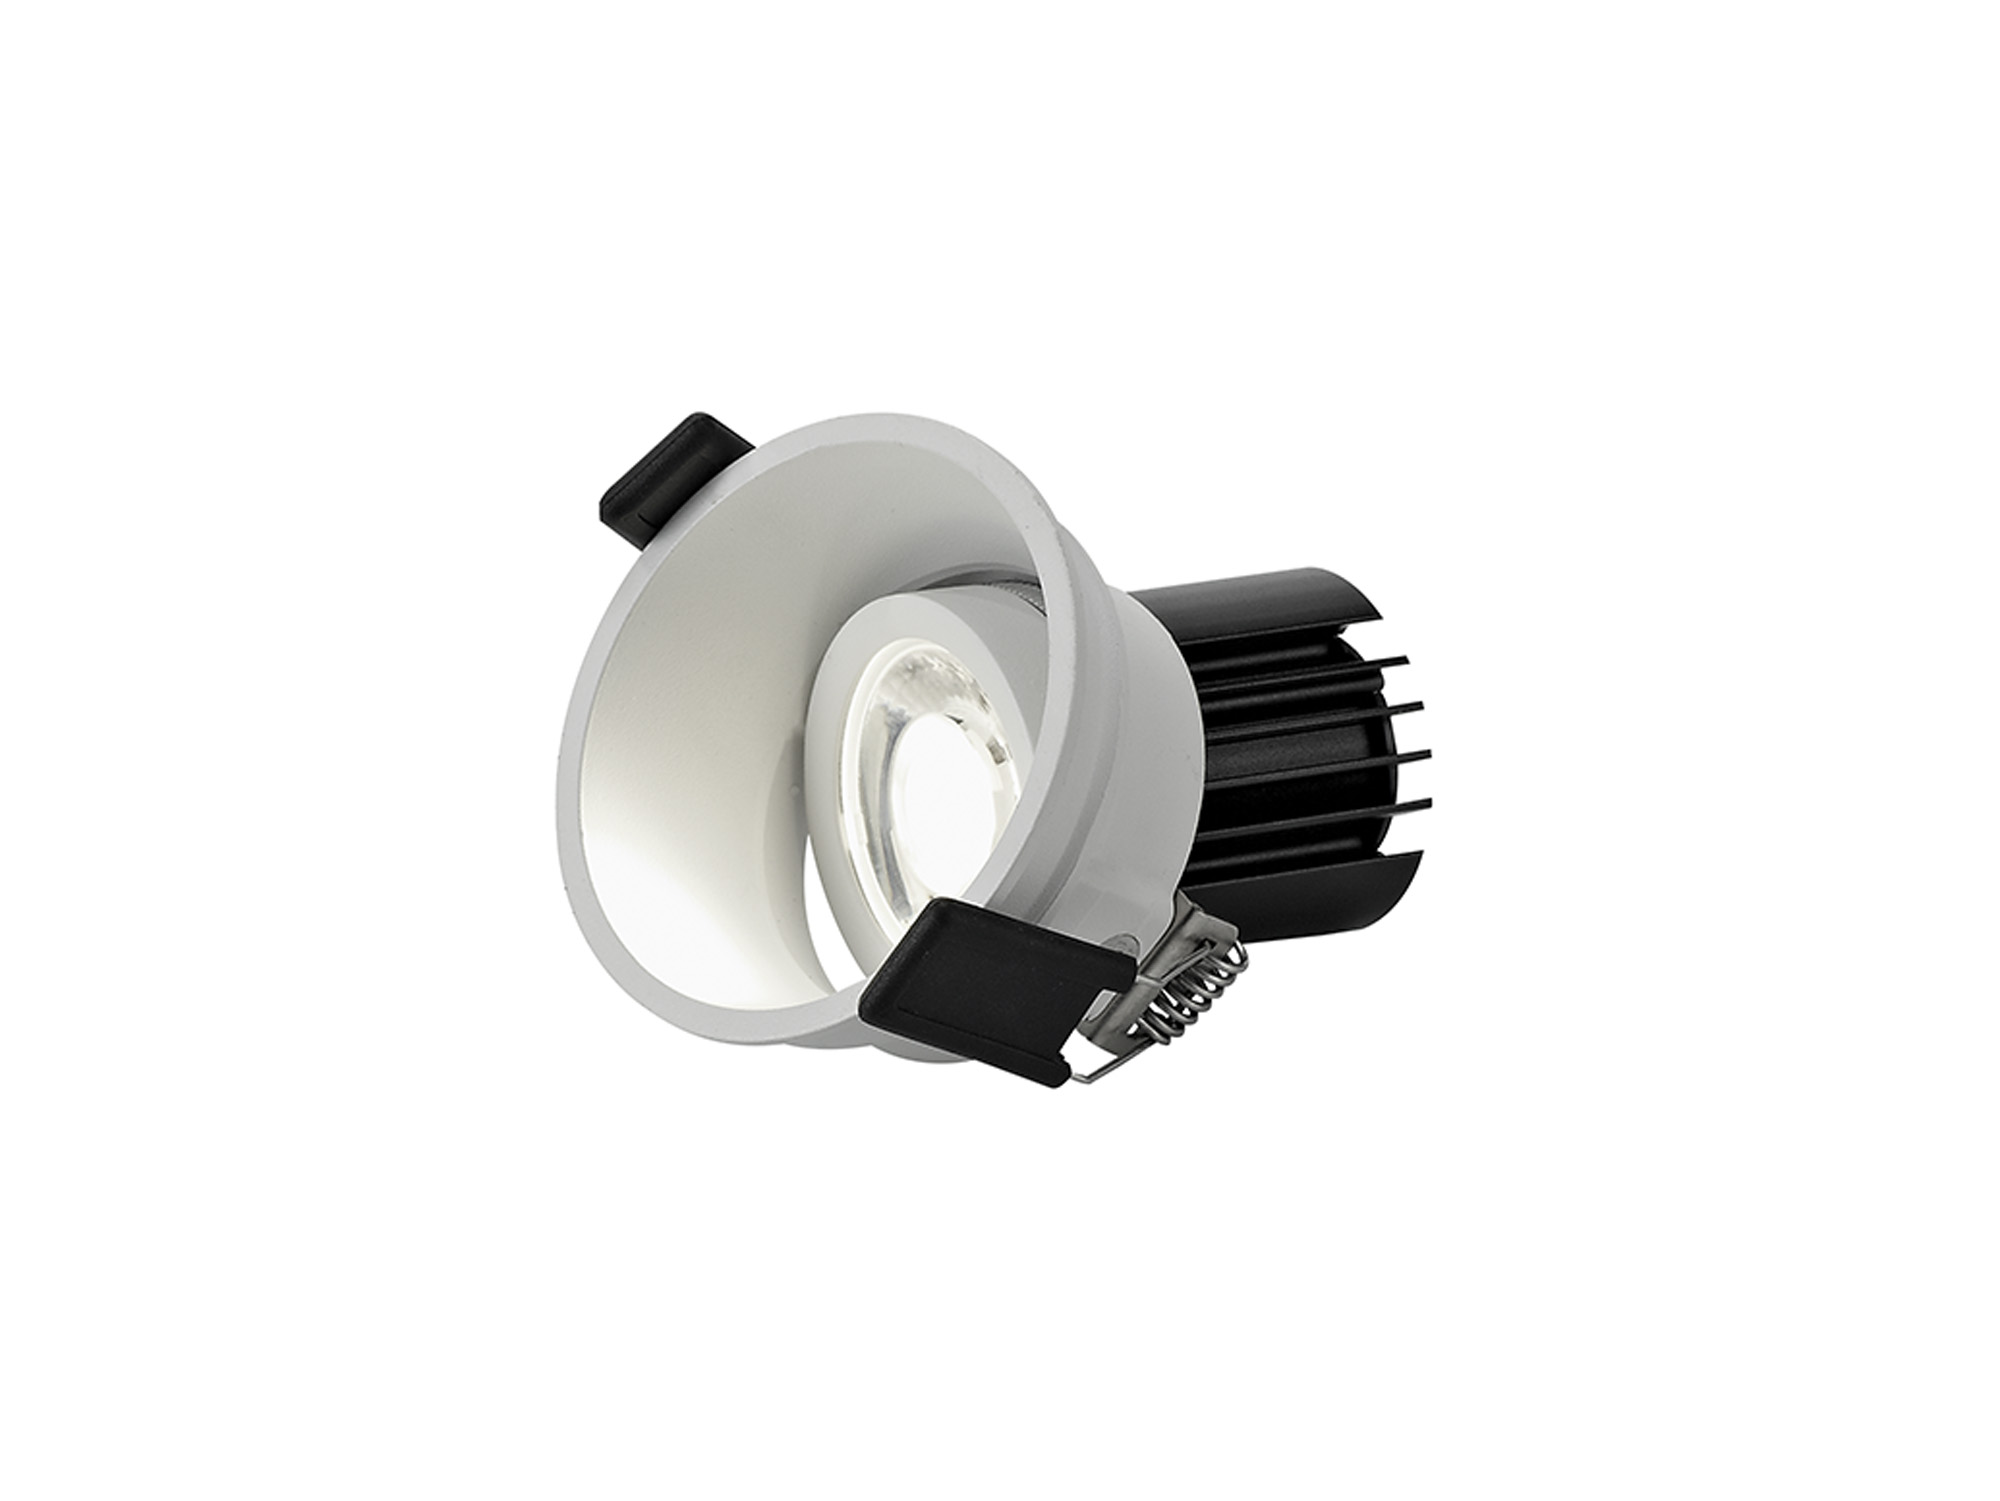 DM201658  Bania A 9 Powered by Tridonic  9W 2700K 770lm 24° CRI>90 LED Engine; 250mA White Adjustable Recessed Spotlight; IP20